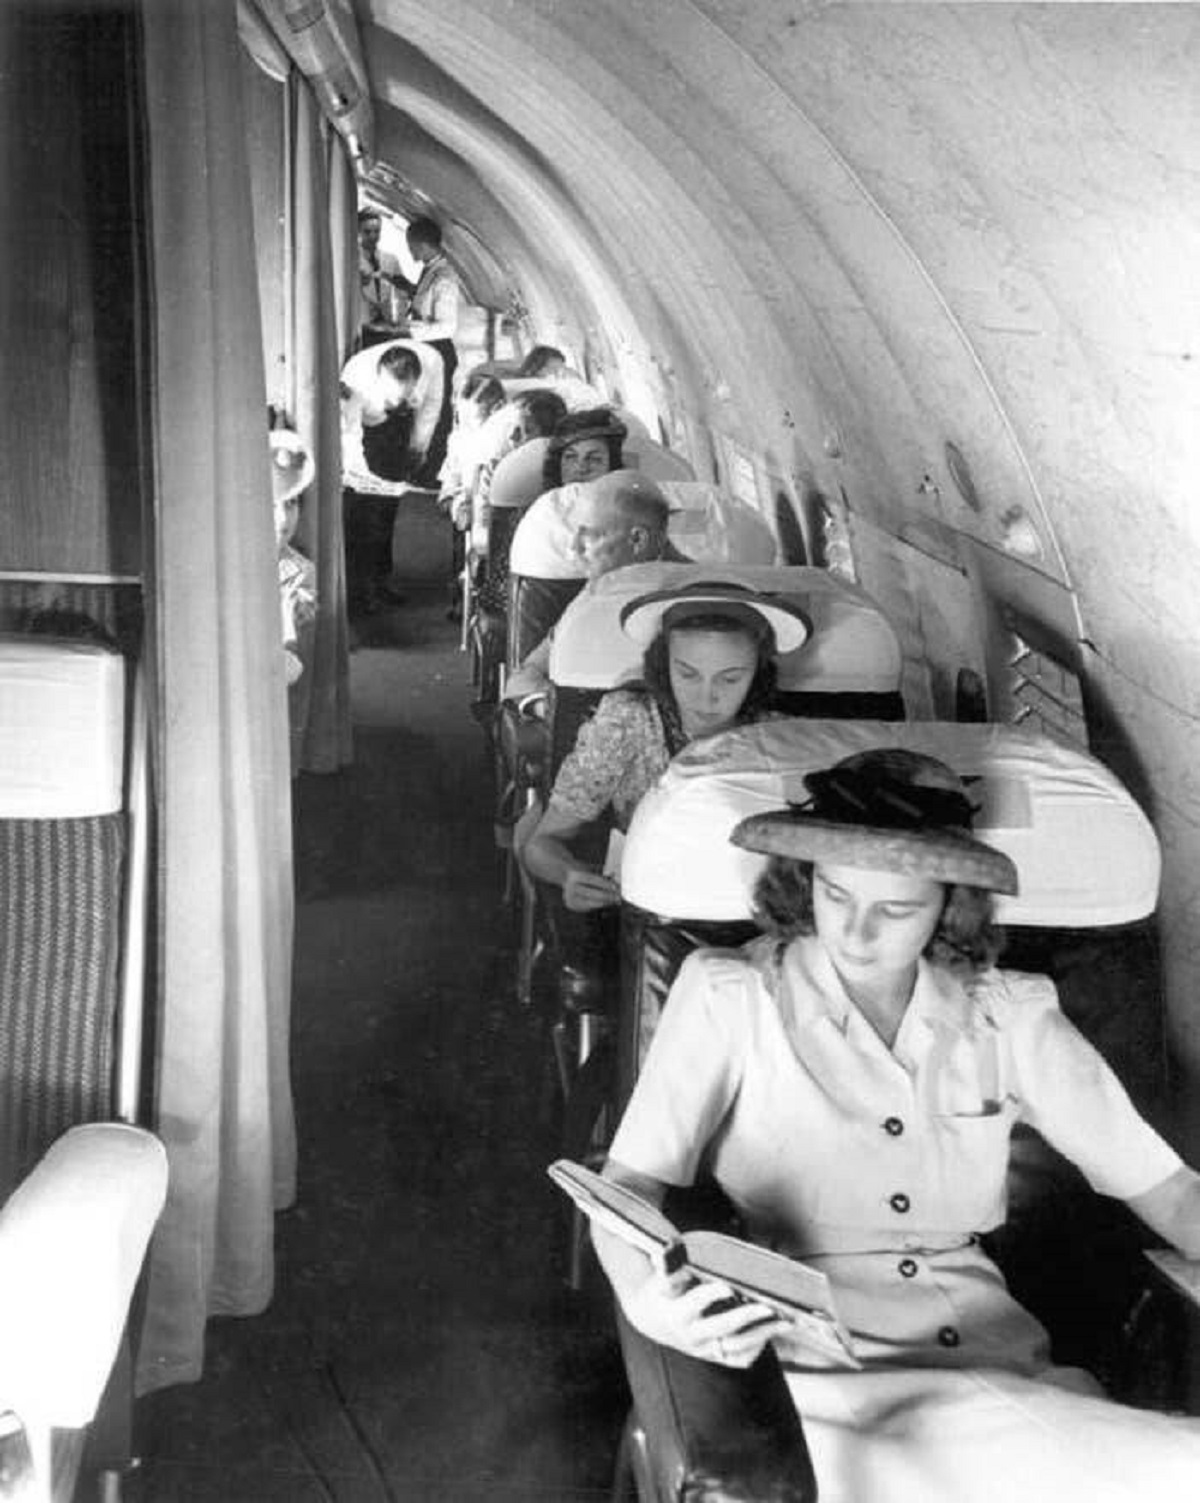 This is what the passenger cabin on a Pan Am flight in the 1940s looked like: